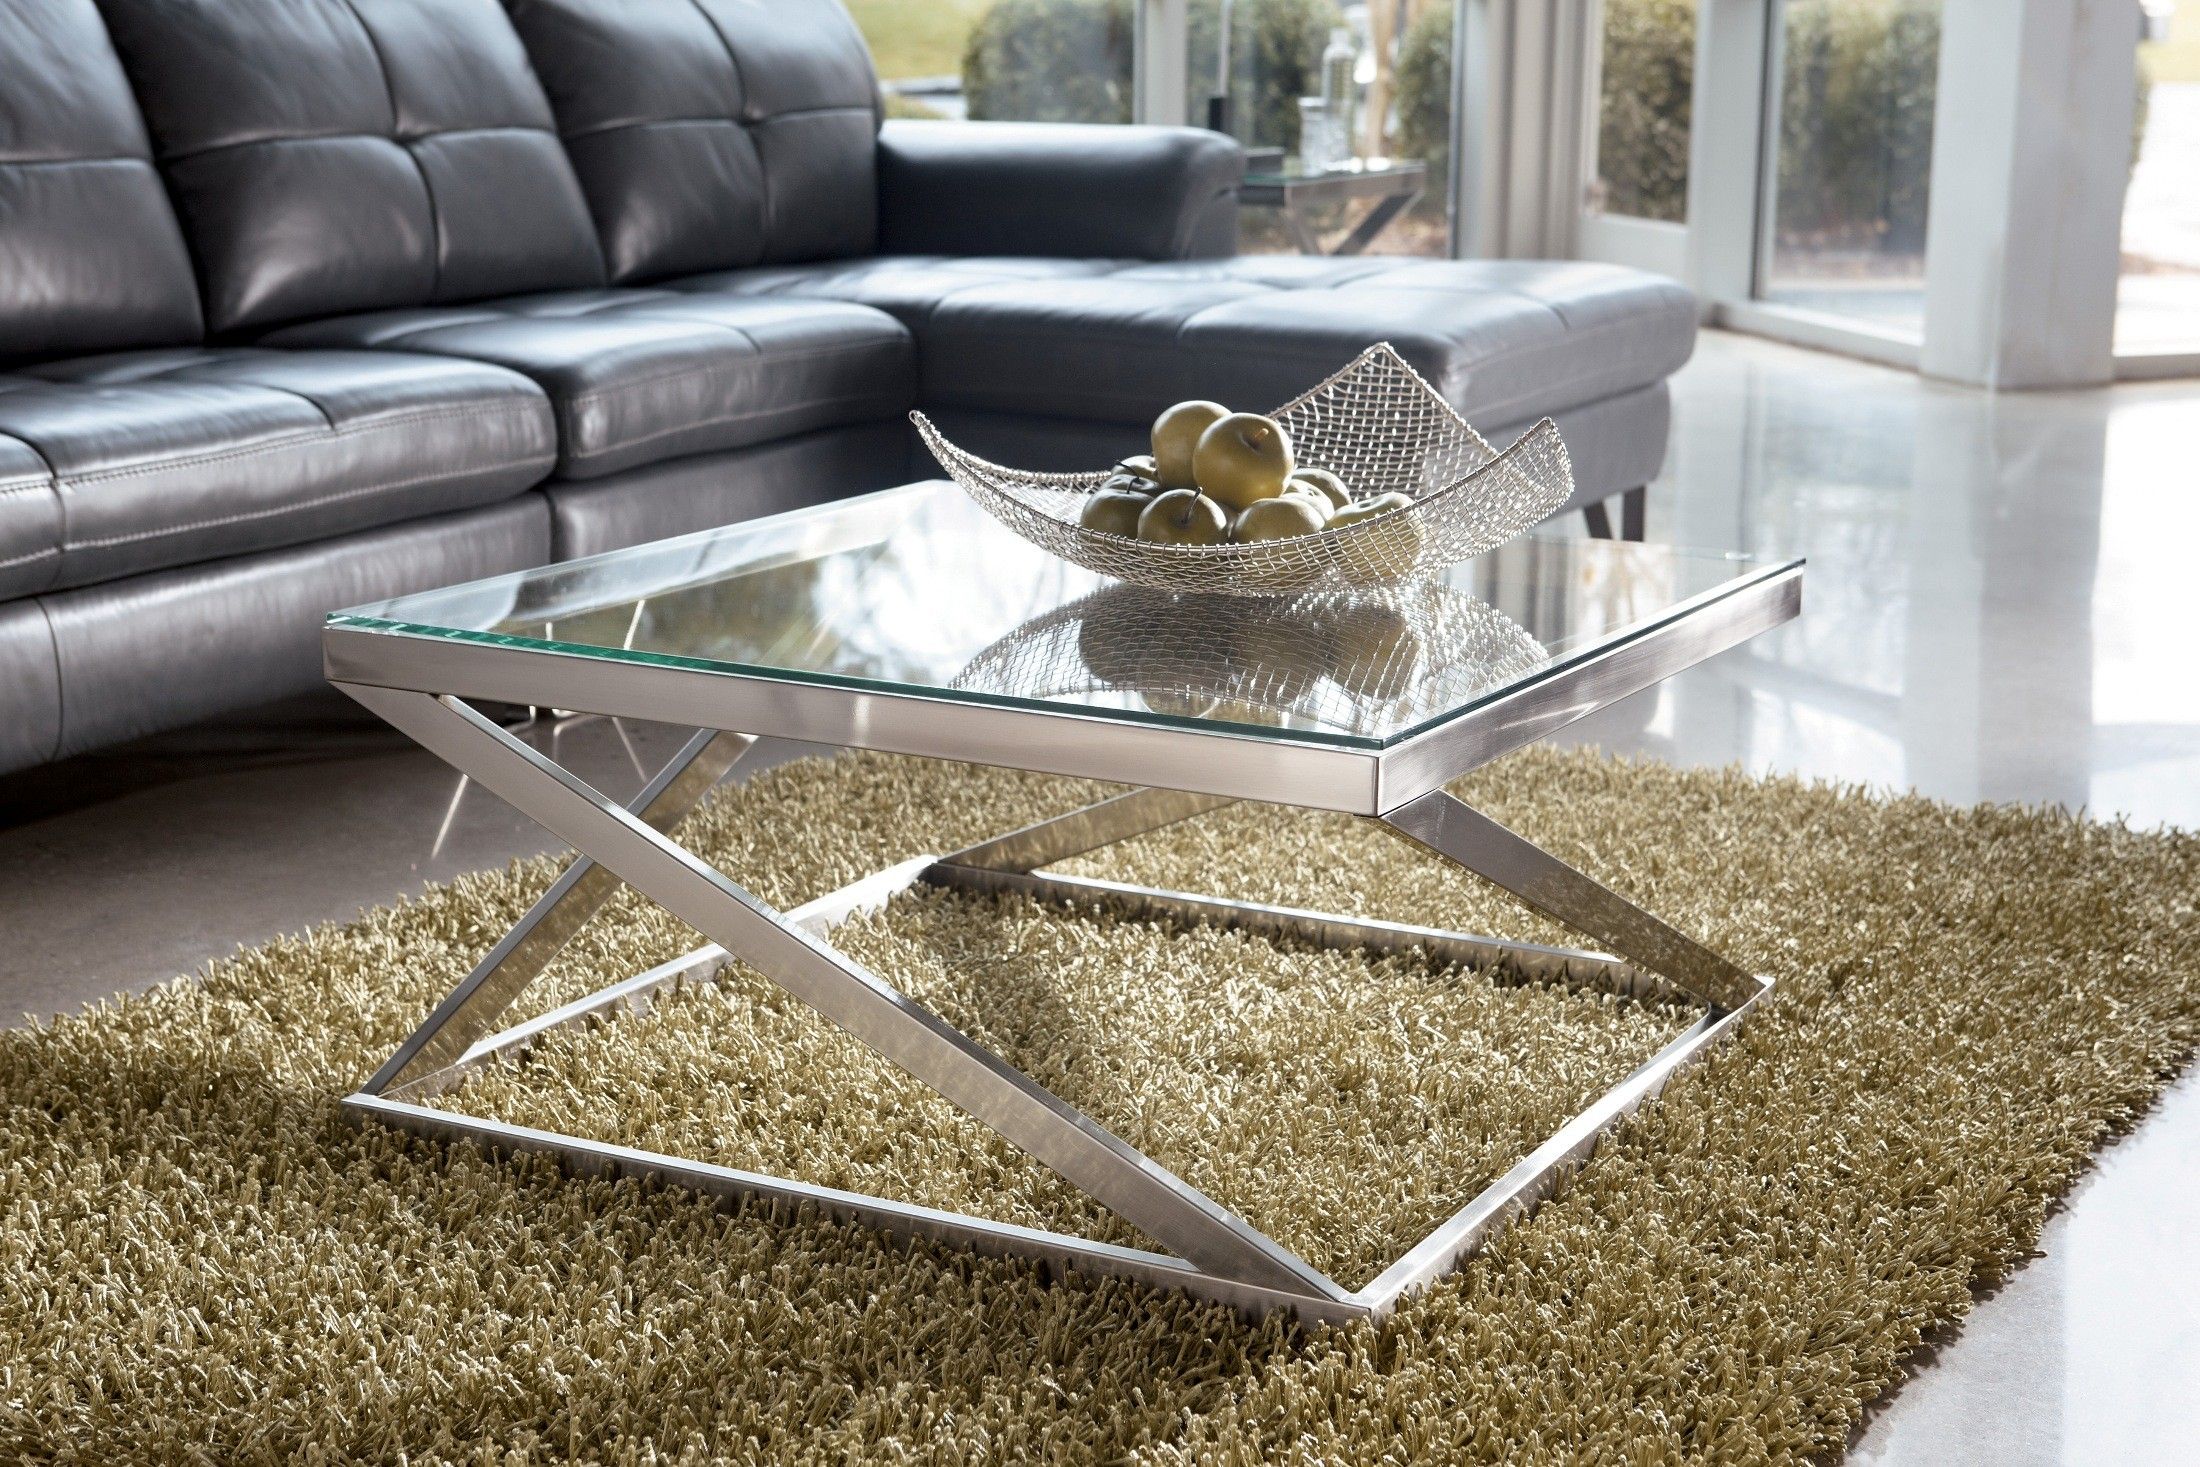 Coylin Square Cocktail Table From Ashley (t136 8) | Coleman Furniture Within Hassch Modern Square Cocktail Tables (View 4 of 20)